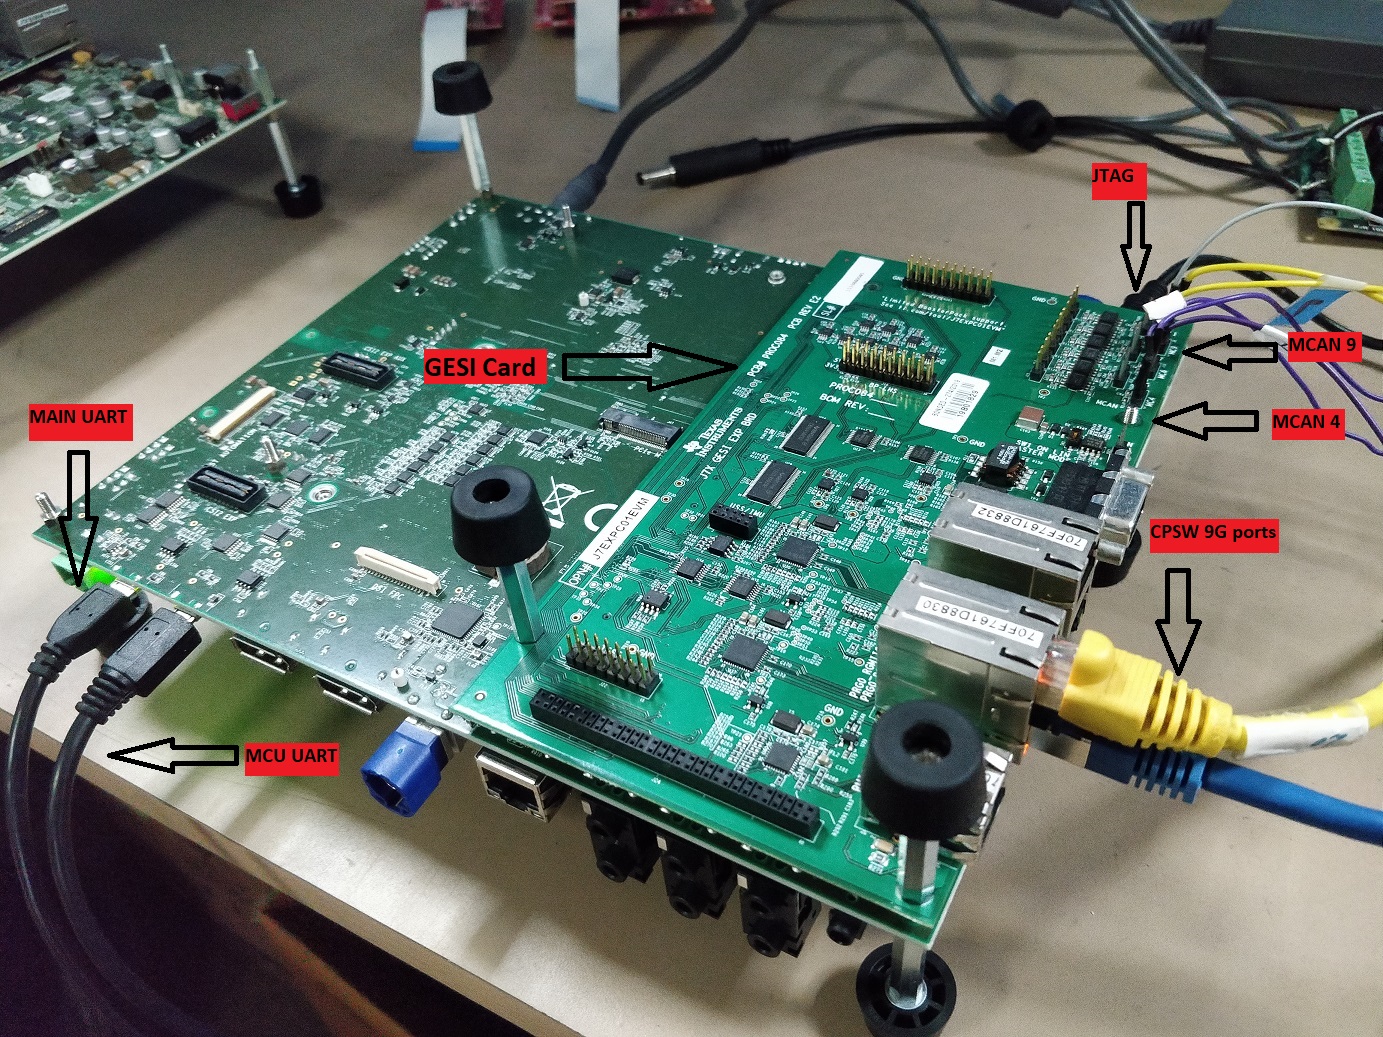 Picture of J721E Demo setup on ESD mat with all wires connected